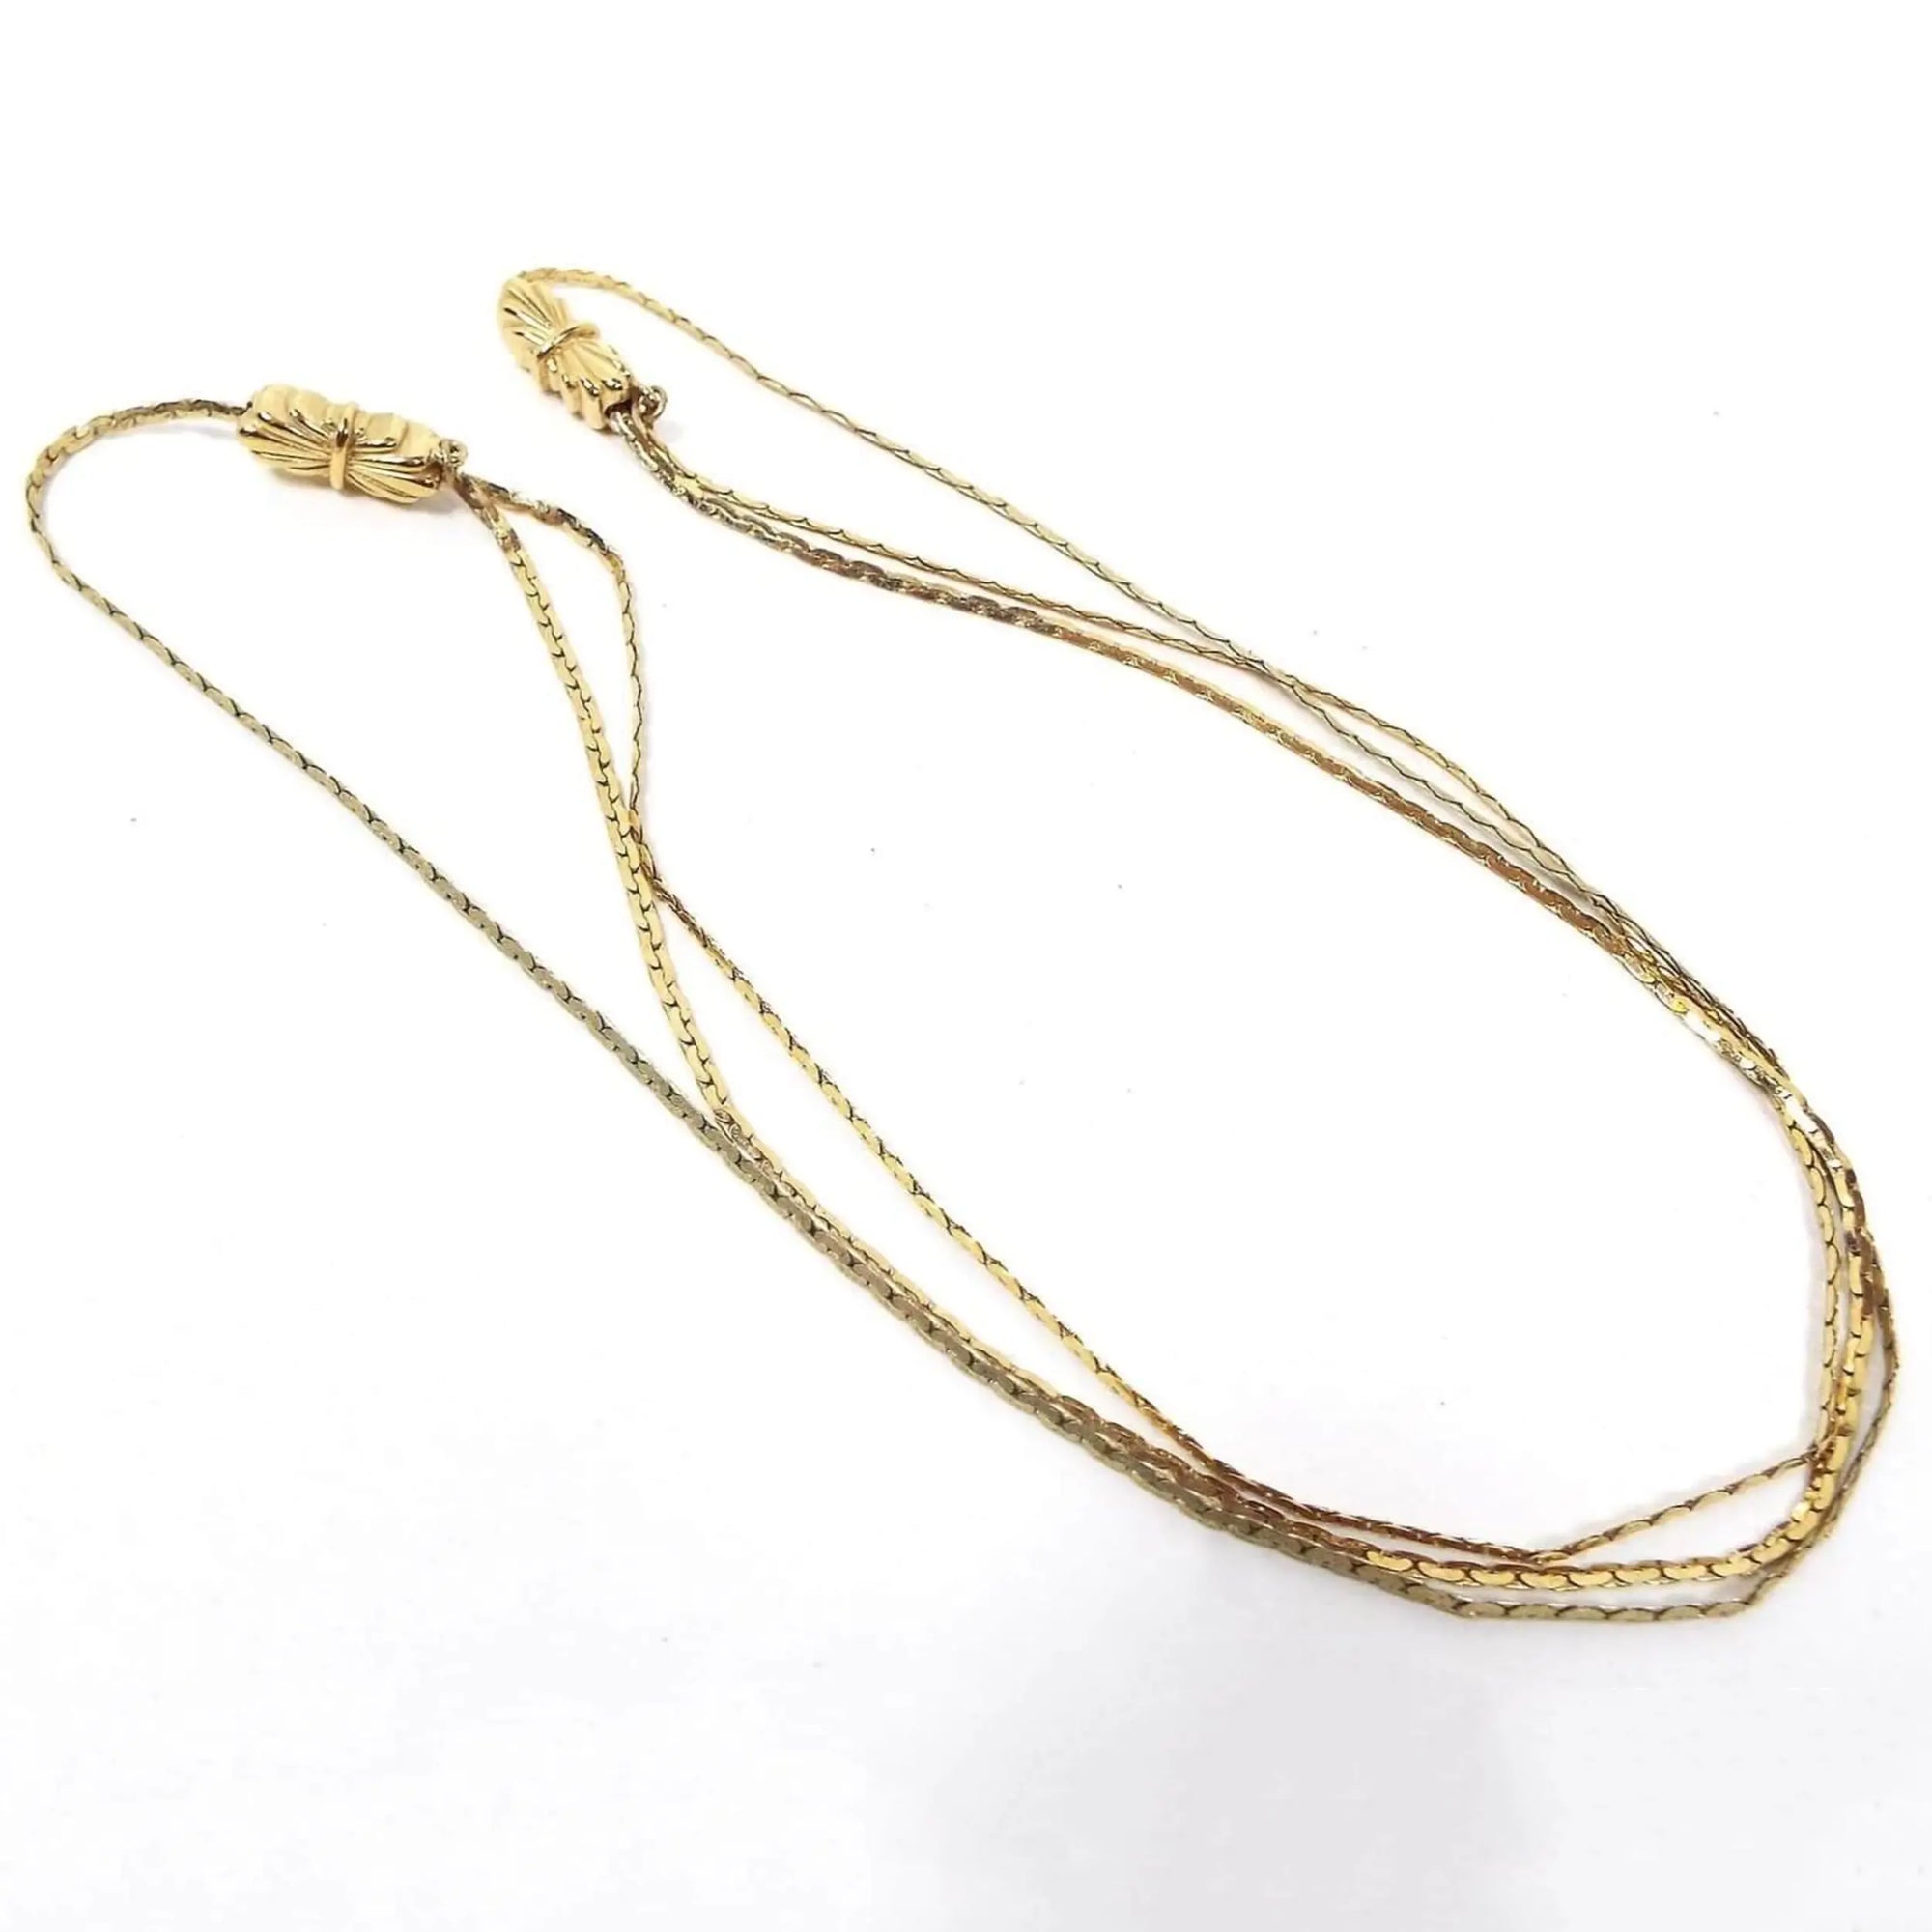 Top view of the retro vintage chain necklace. The C link chain is gold tone in color. There are two bow like slide links towards the top of the necklace that slide up and down the chain to adjust the length. The bottom part of the necklace has two strands that also can be made longer or shorter when adjusting the chain.